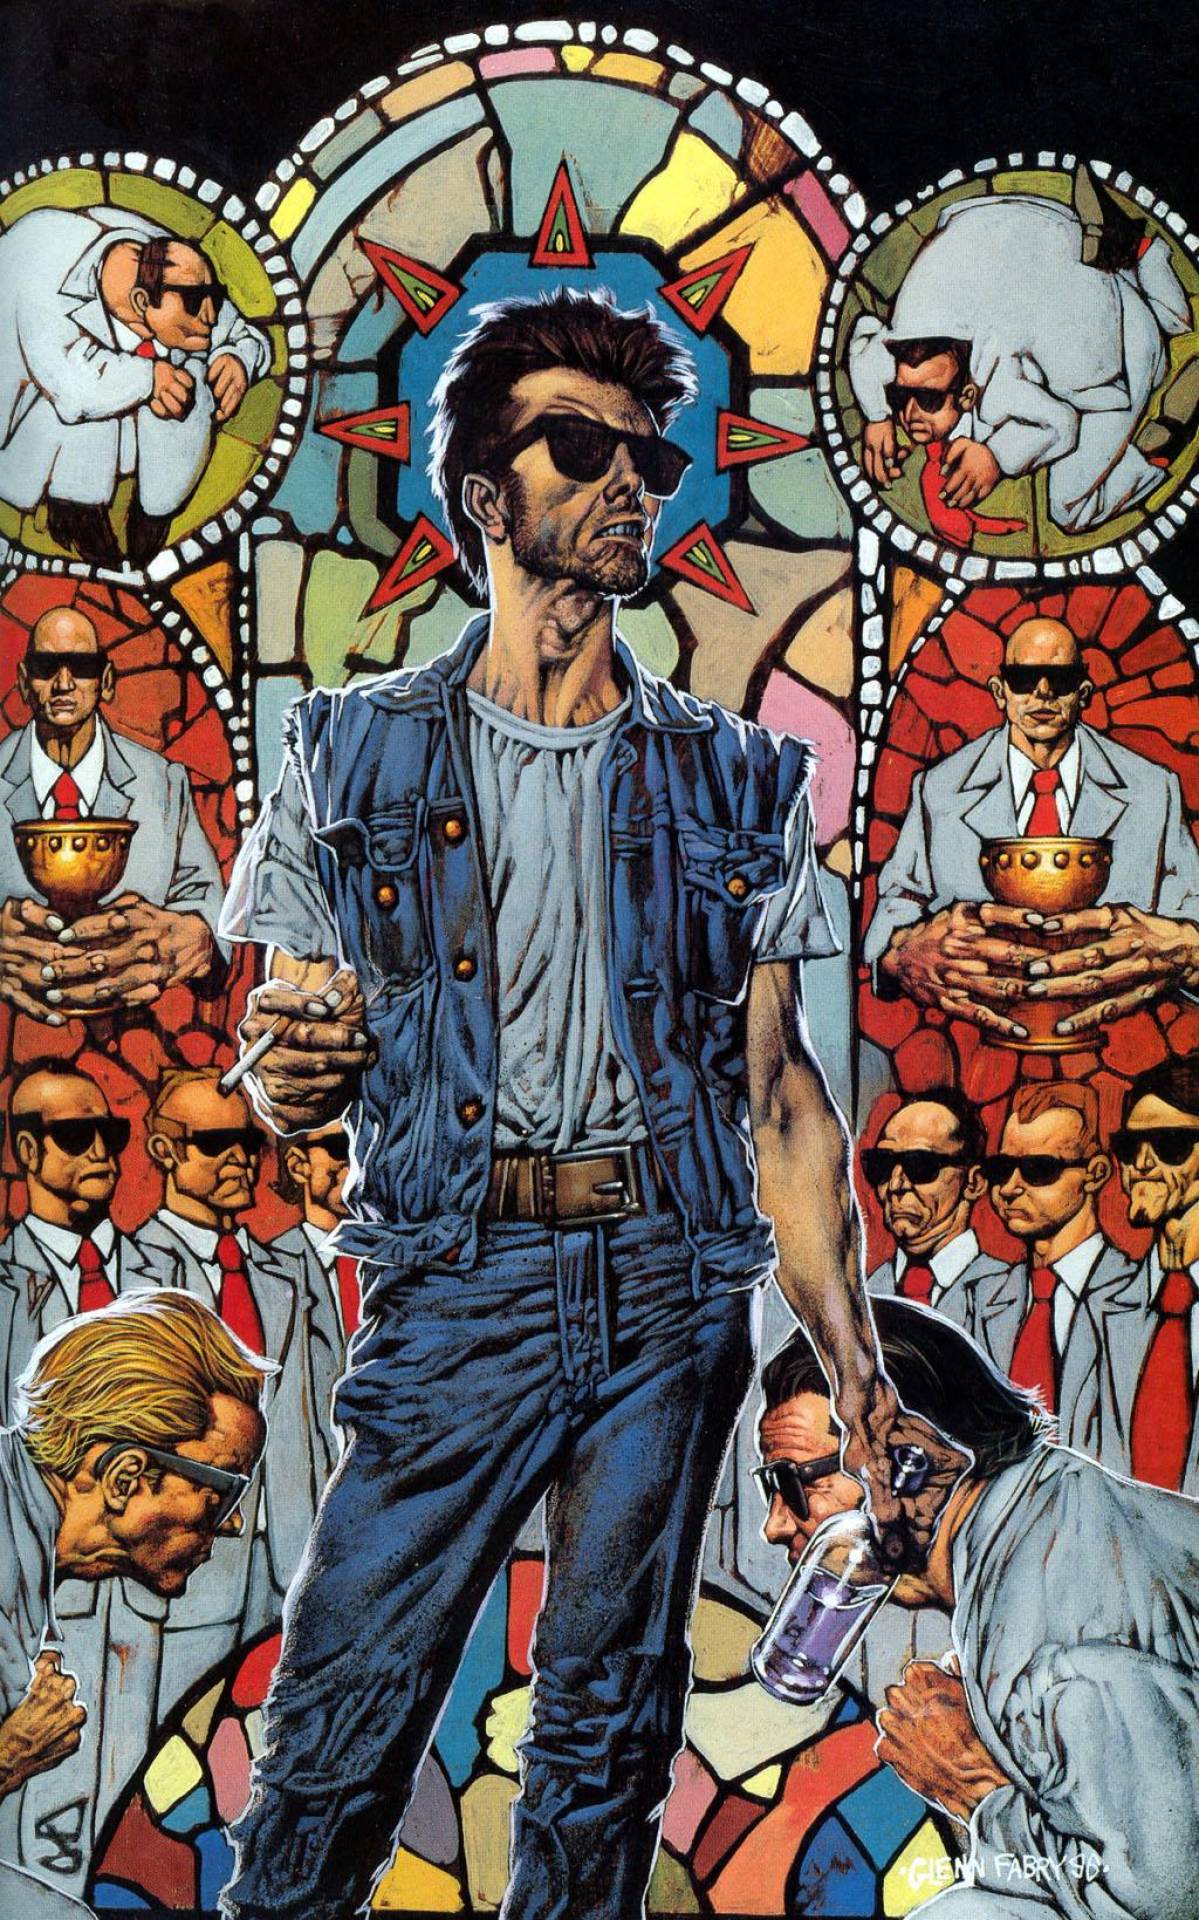 15 upcoming comic book tv shows and movies: preacher